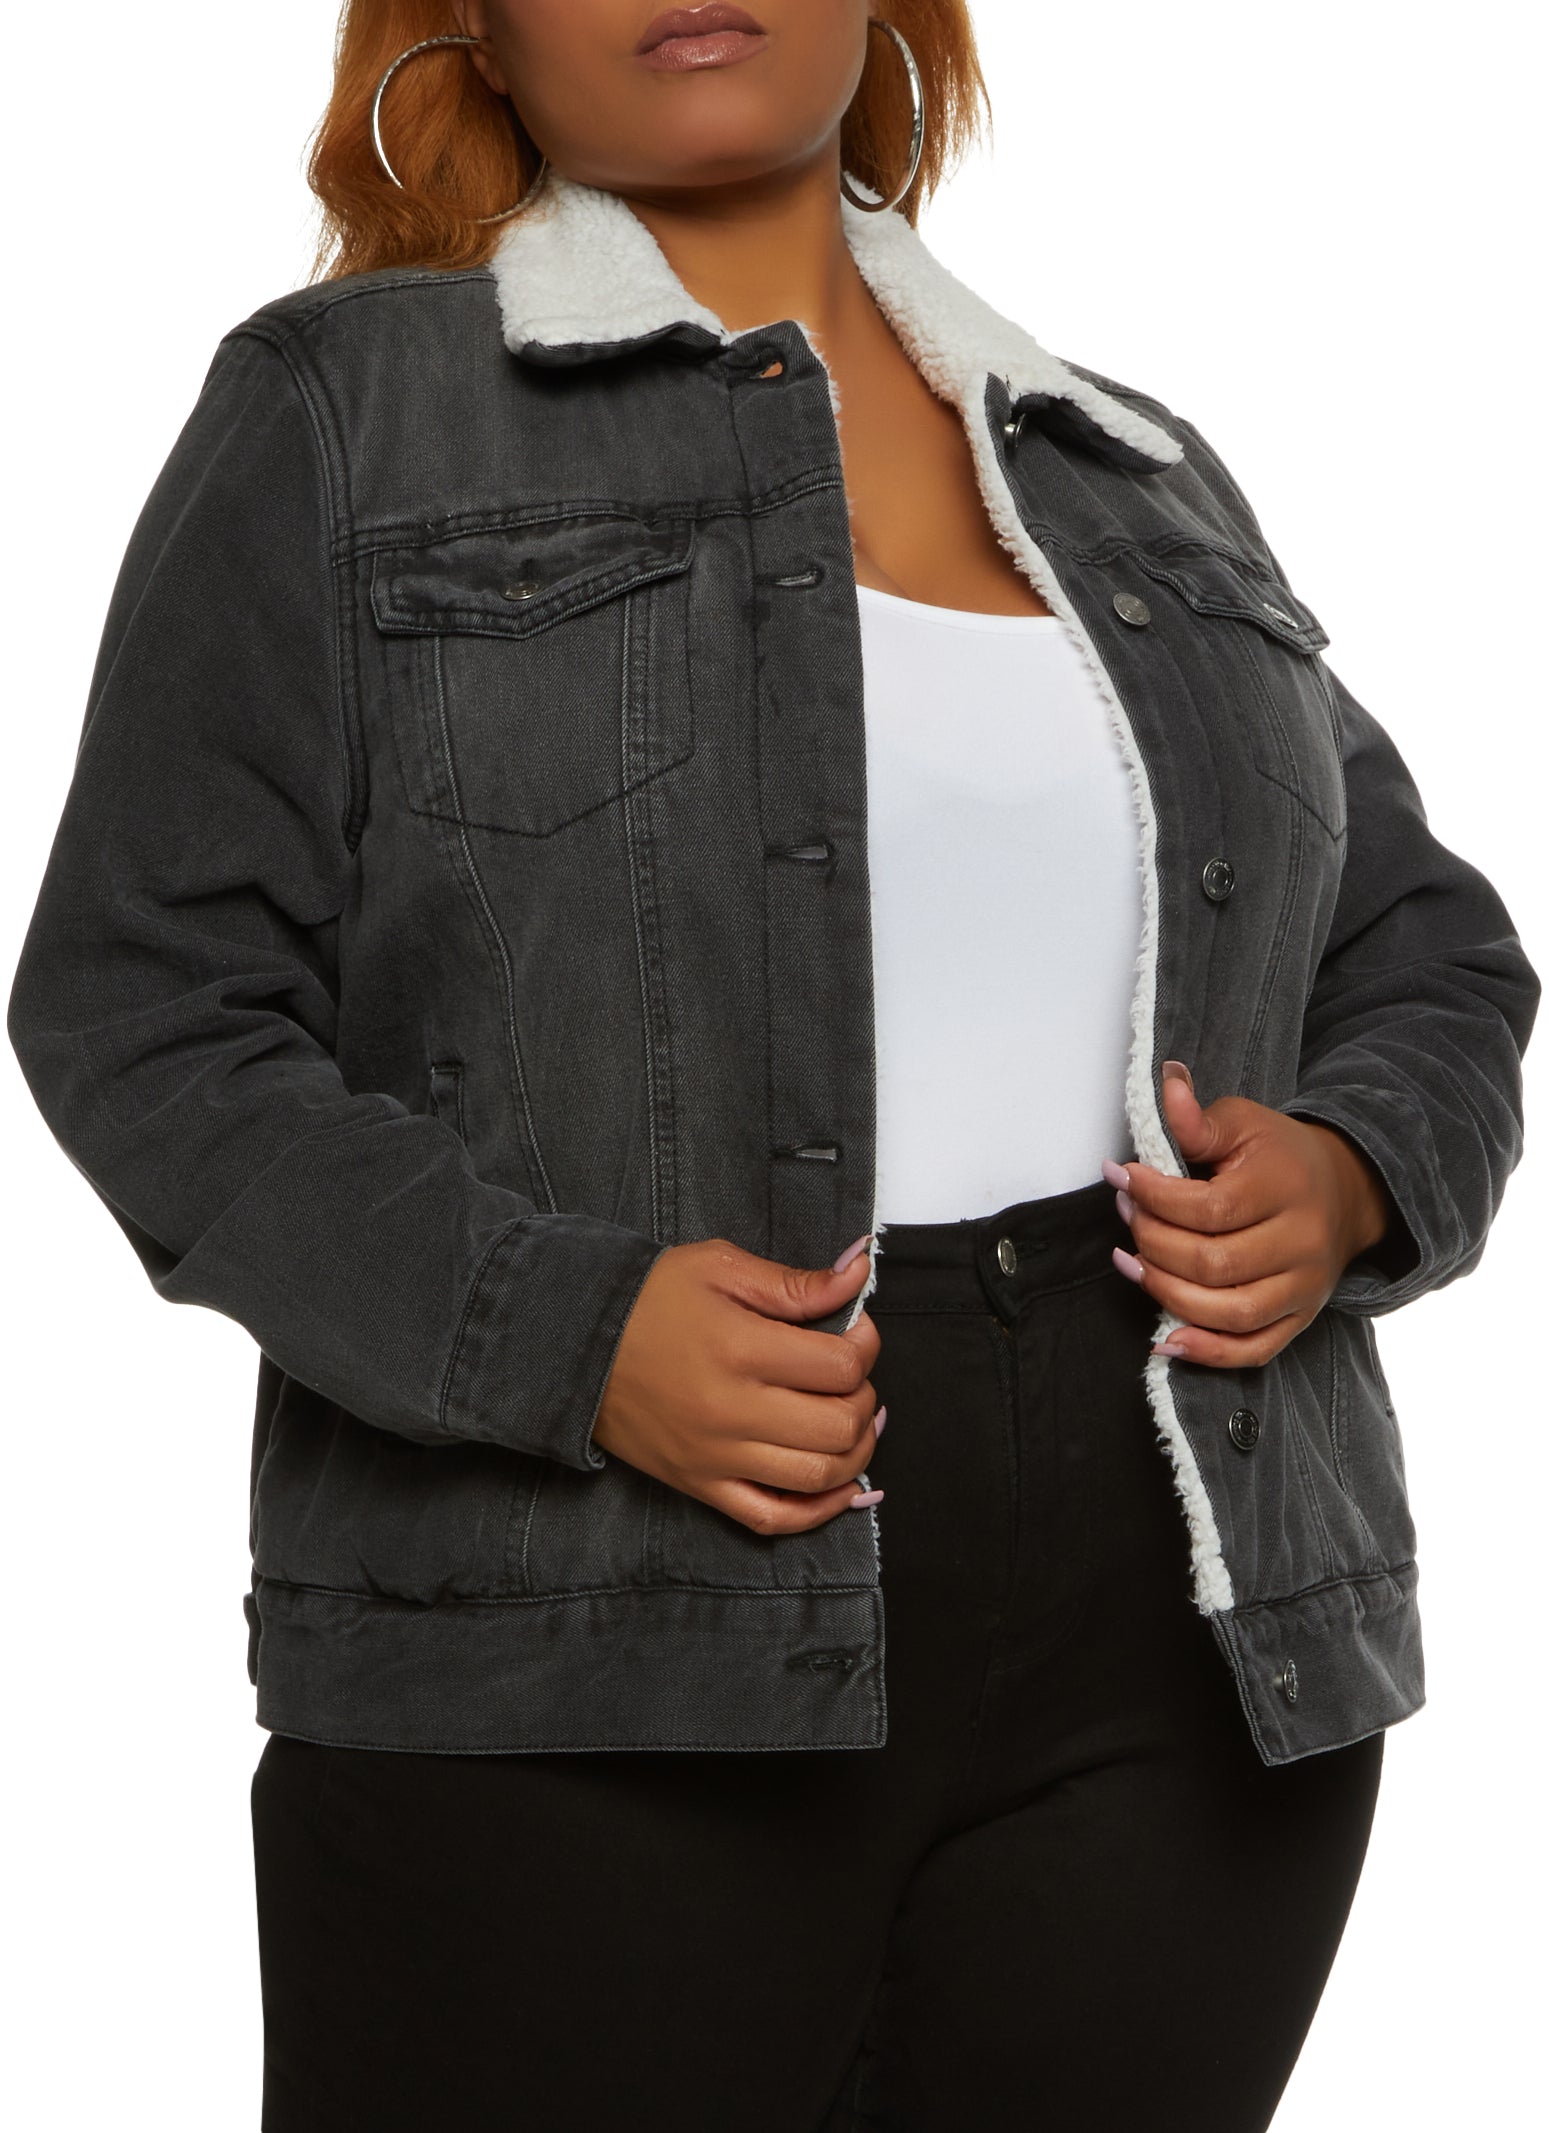 RYRJJ Clearance Women's Plus Size Full Coverage Non Padded